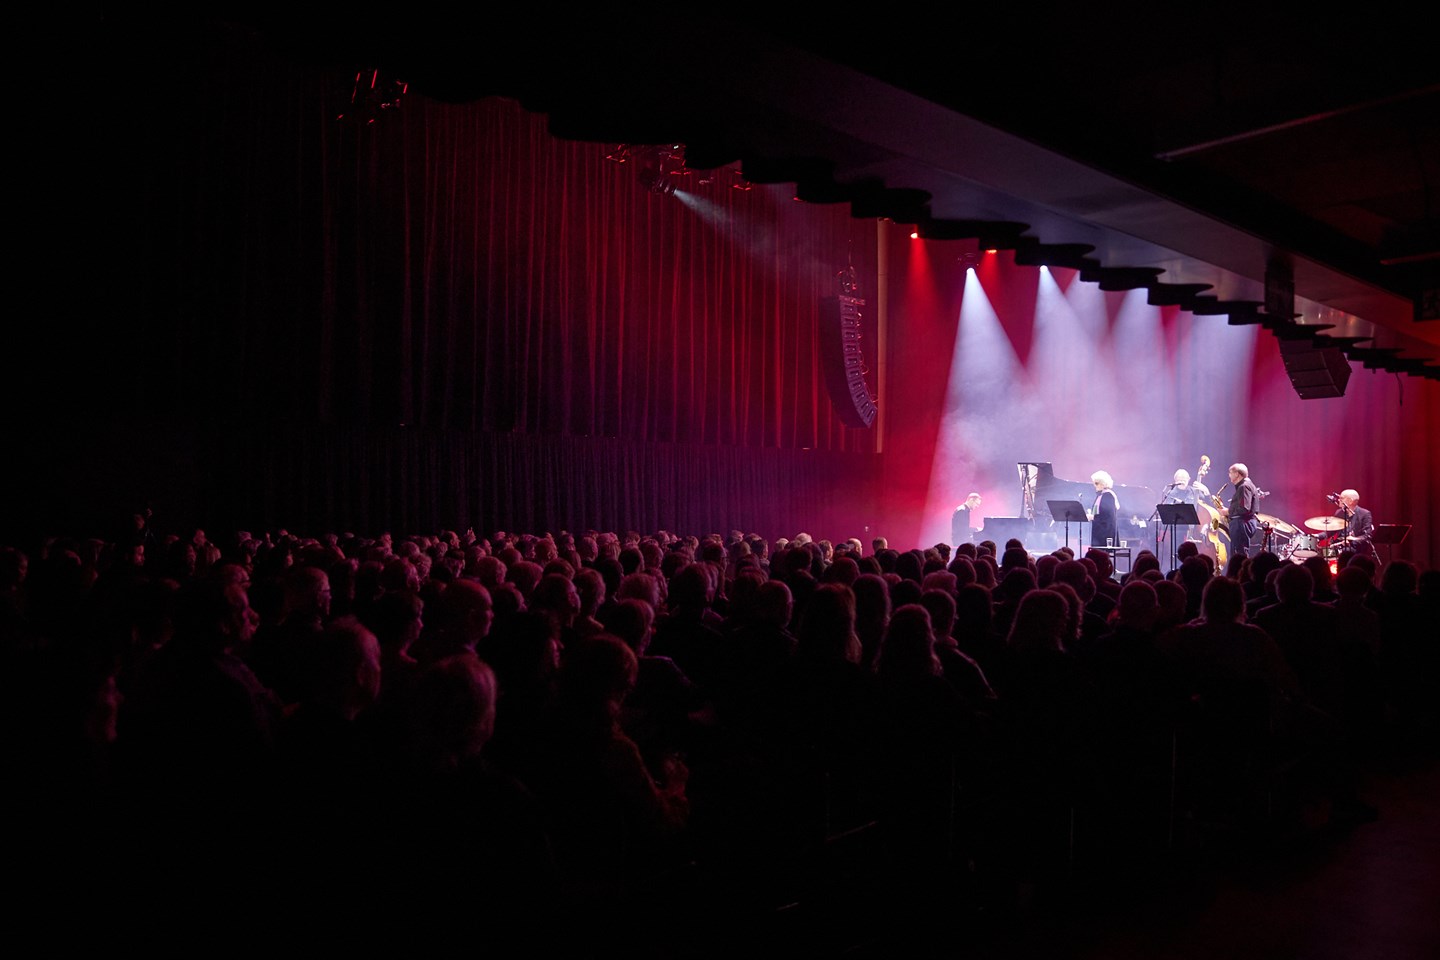 Jazz musicians on stage in a full concert hall